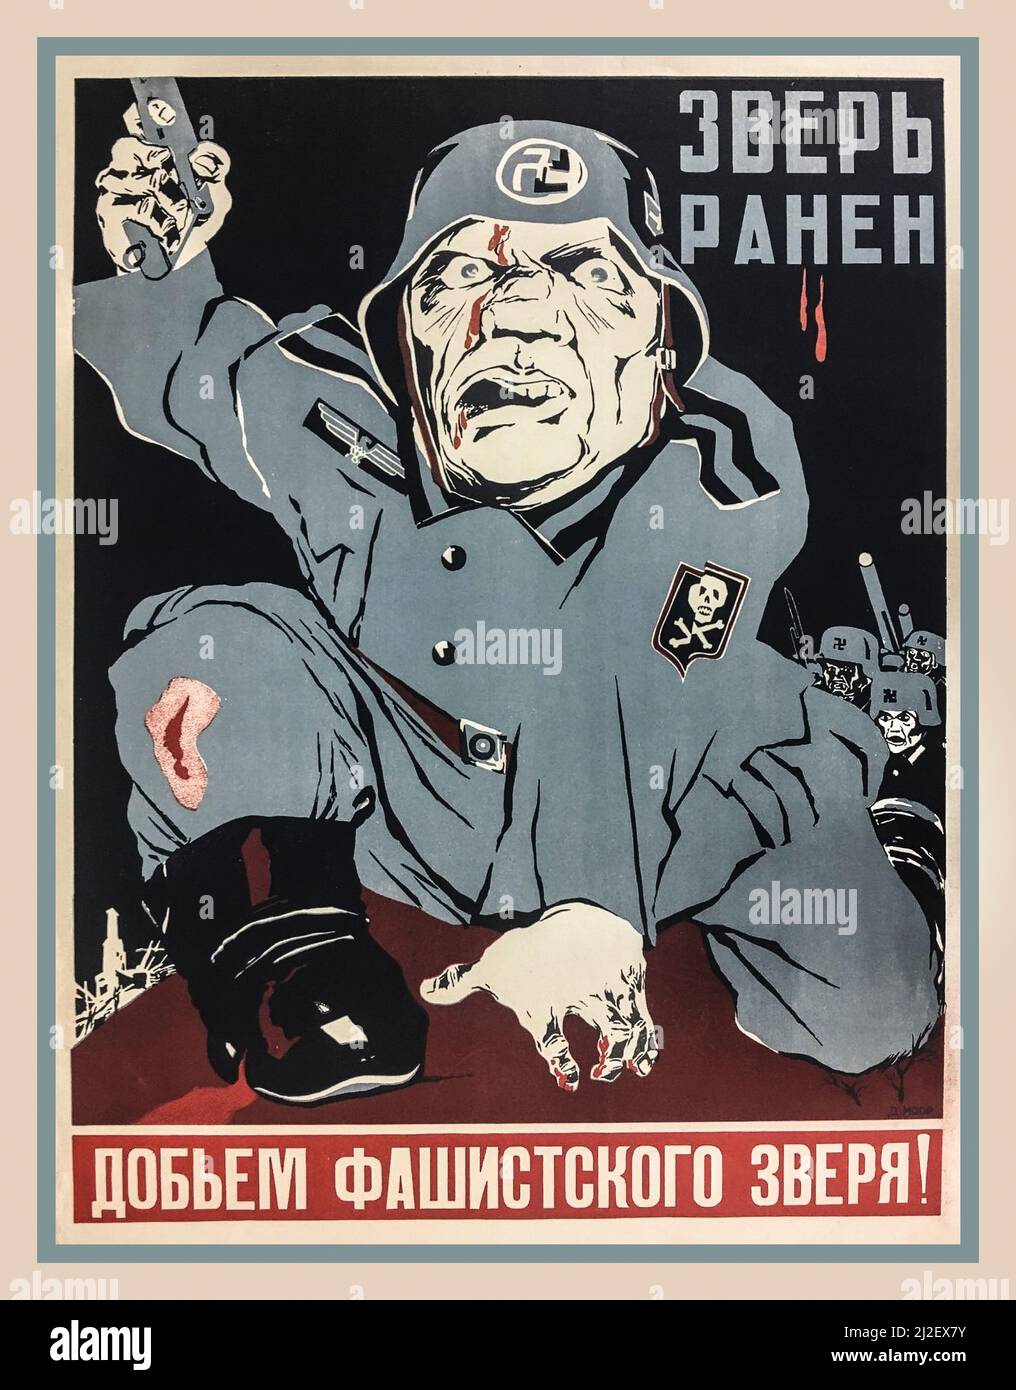 Vintage WW2 RUSSIAN SOVIET USSR Anti Nazi Poster by Soviet Russian Forces. 1943. 'The beast is wounded. Let's finish off the fascist beast!’. Eastern Front Waffen SS date 1943 World War II Second World War Stock Photo